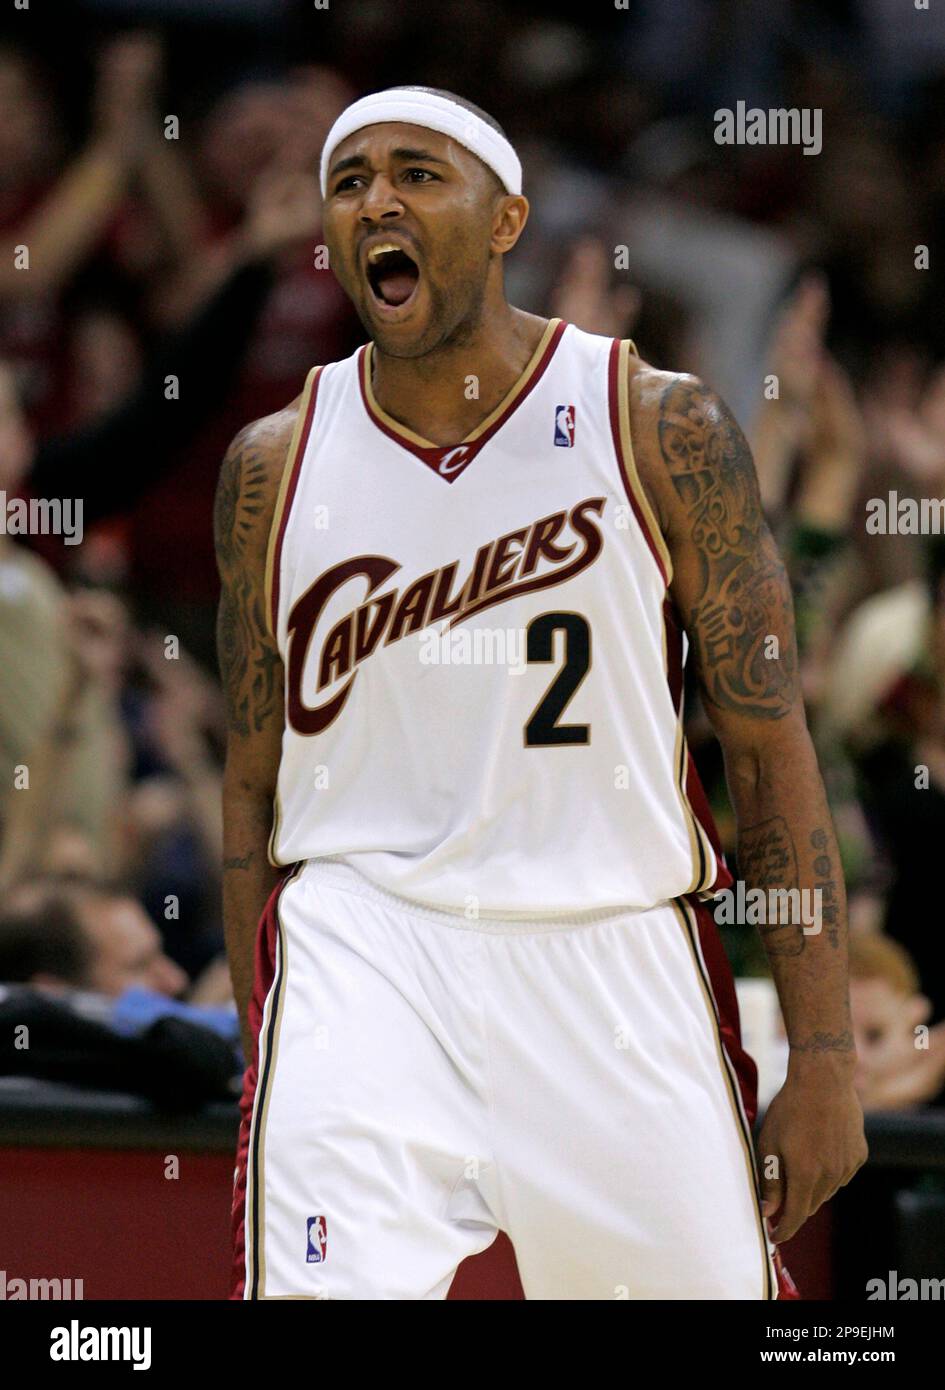 Mo Williams played with LeBron from 2008 to 2010.